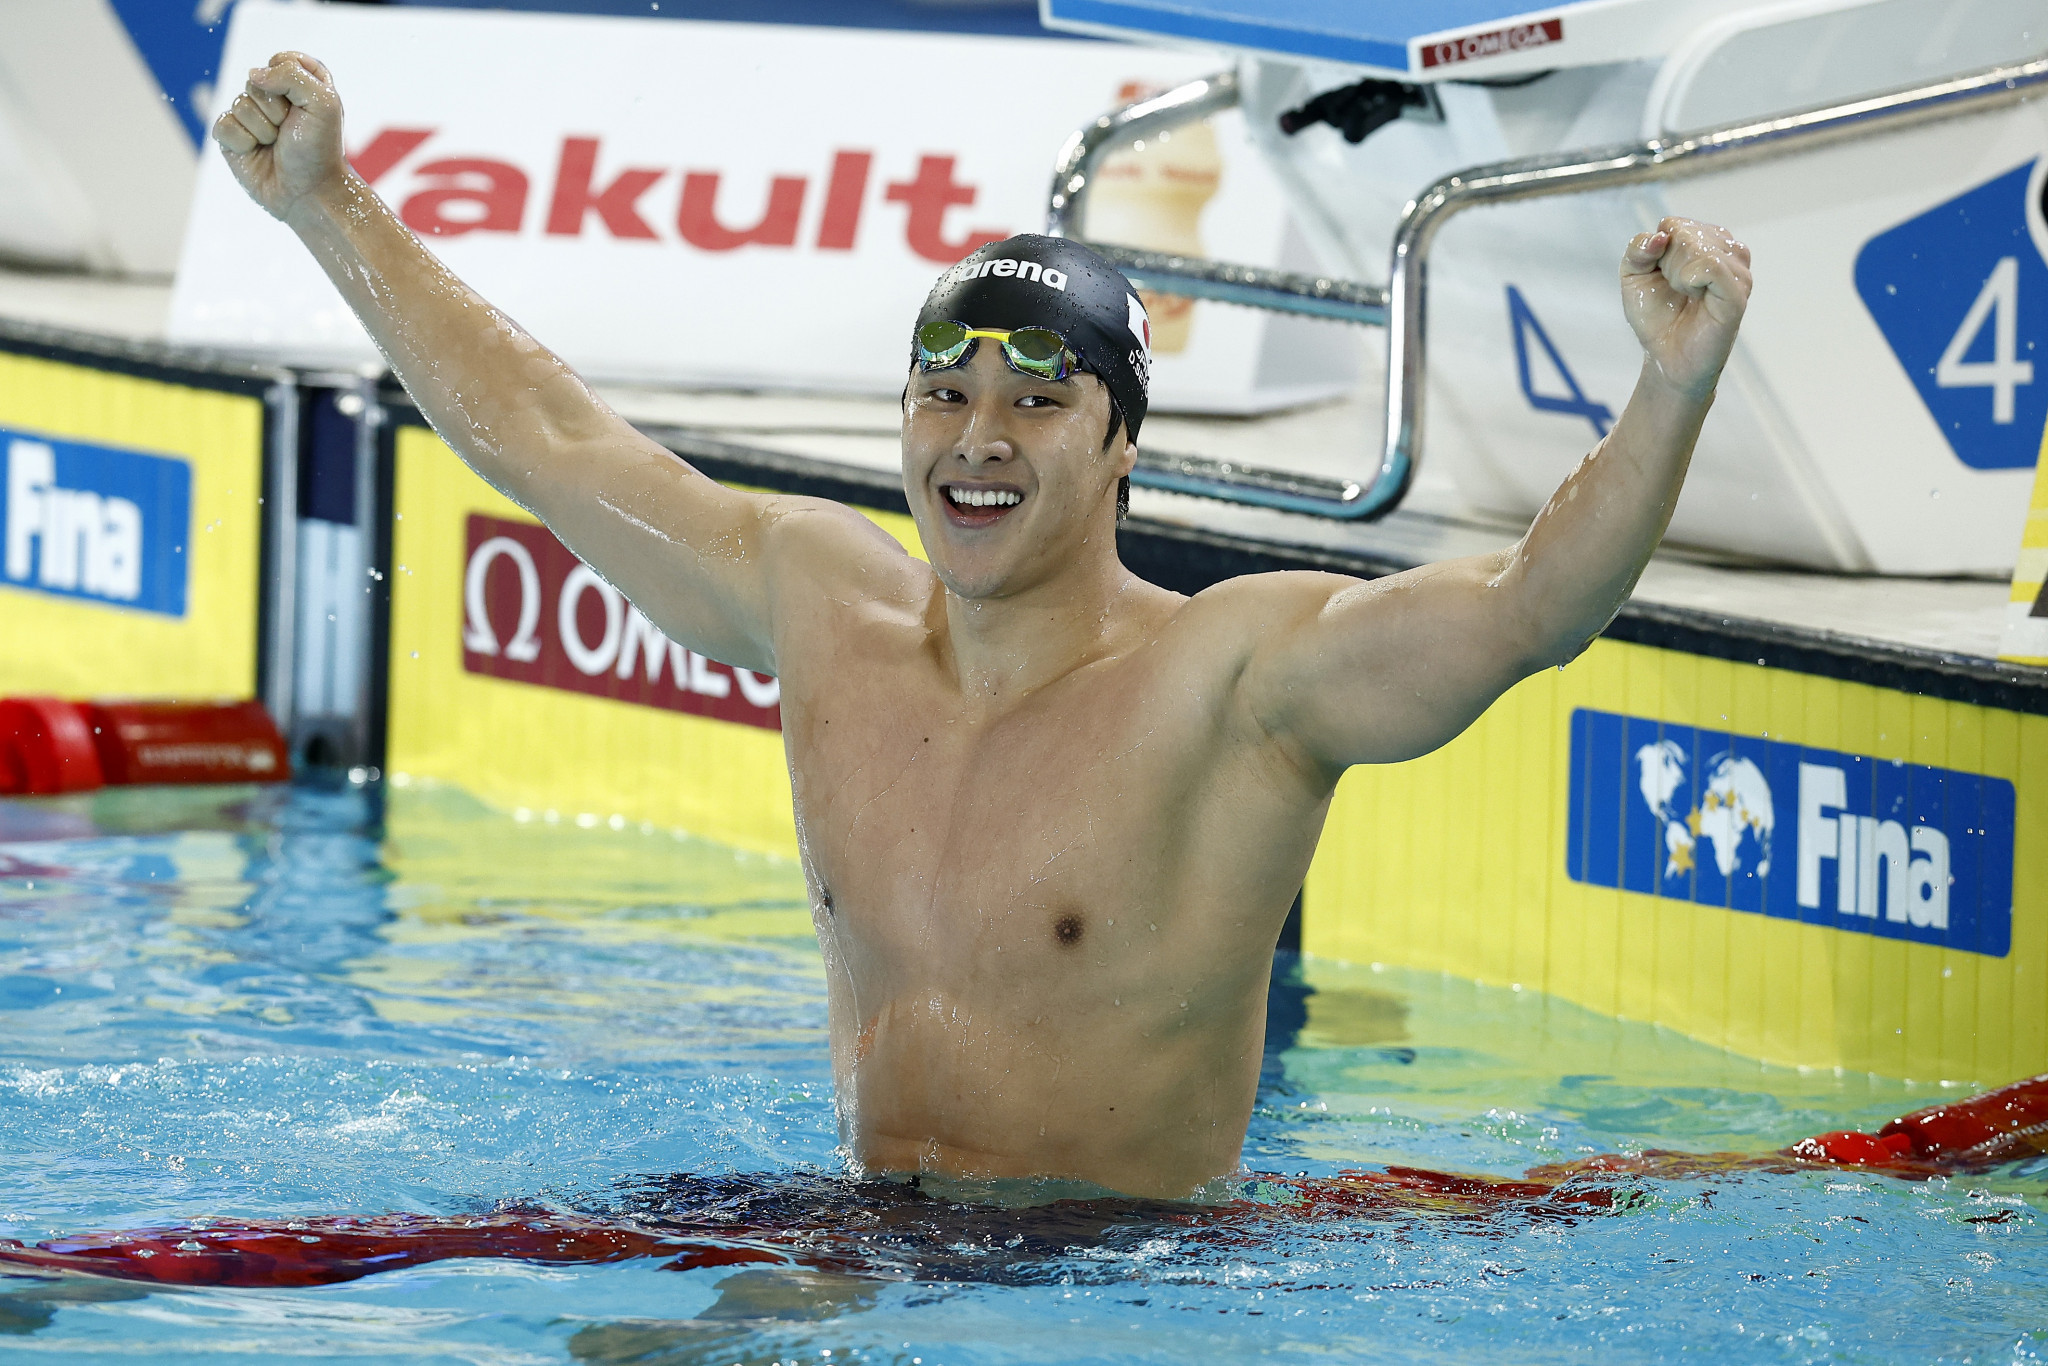 Japan’s Daiya Seto celebrates after winning his ninth world short-course gold medal and second in Melbourne with victory in the men's 400m individual medley final ©Getty Images